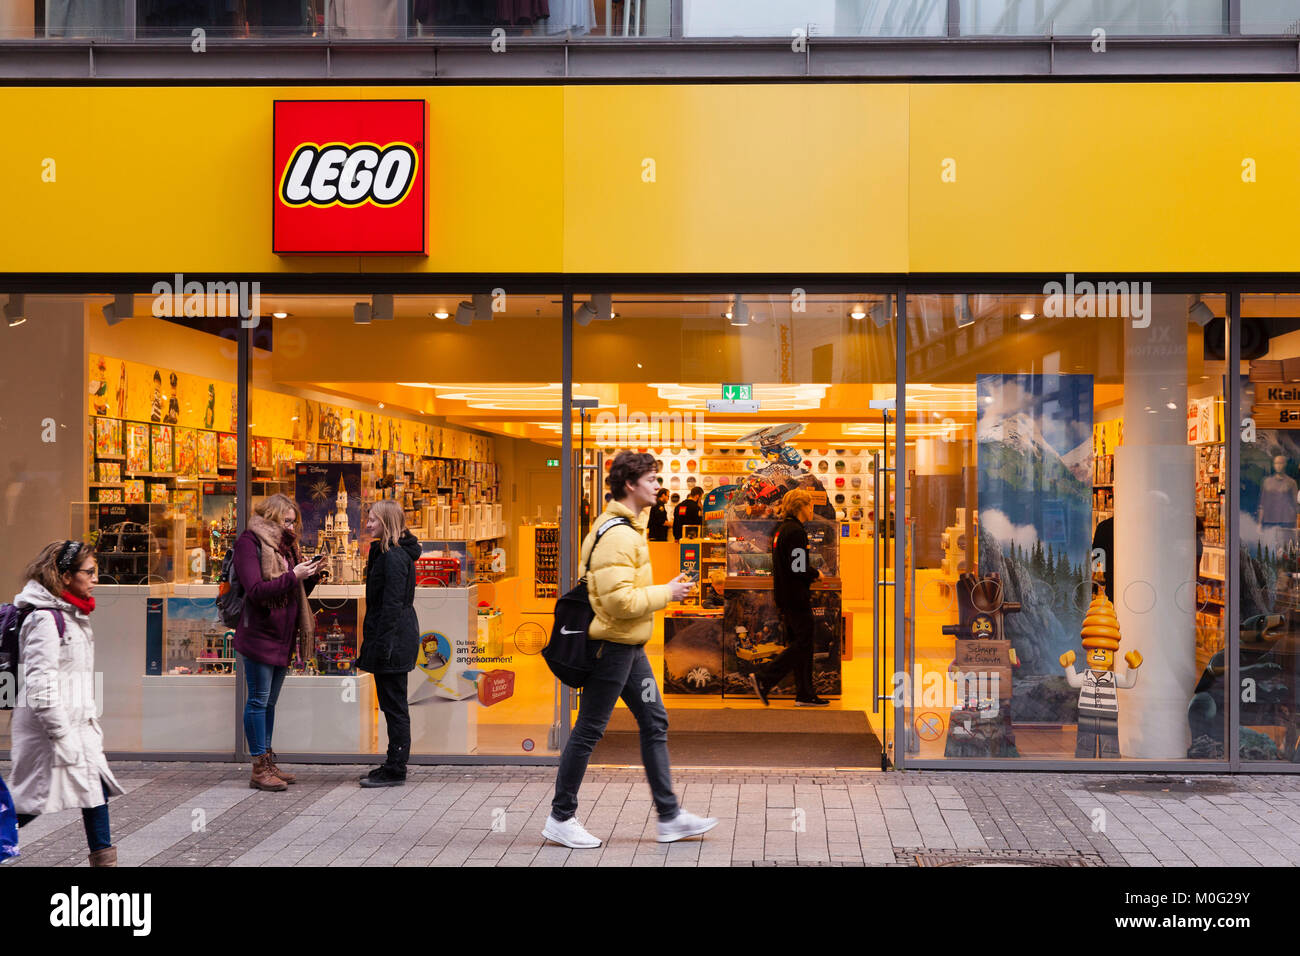 The Lego Store Window High Resolution Stock Photography and Images - Alamy